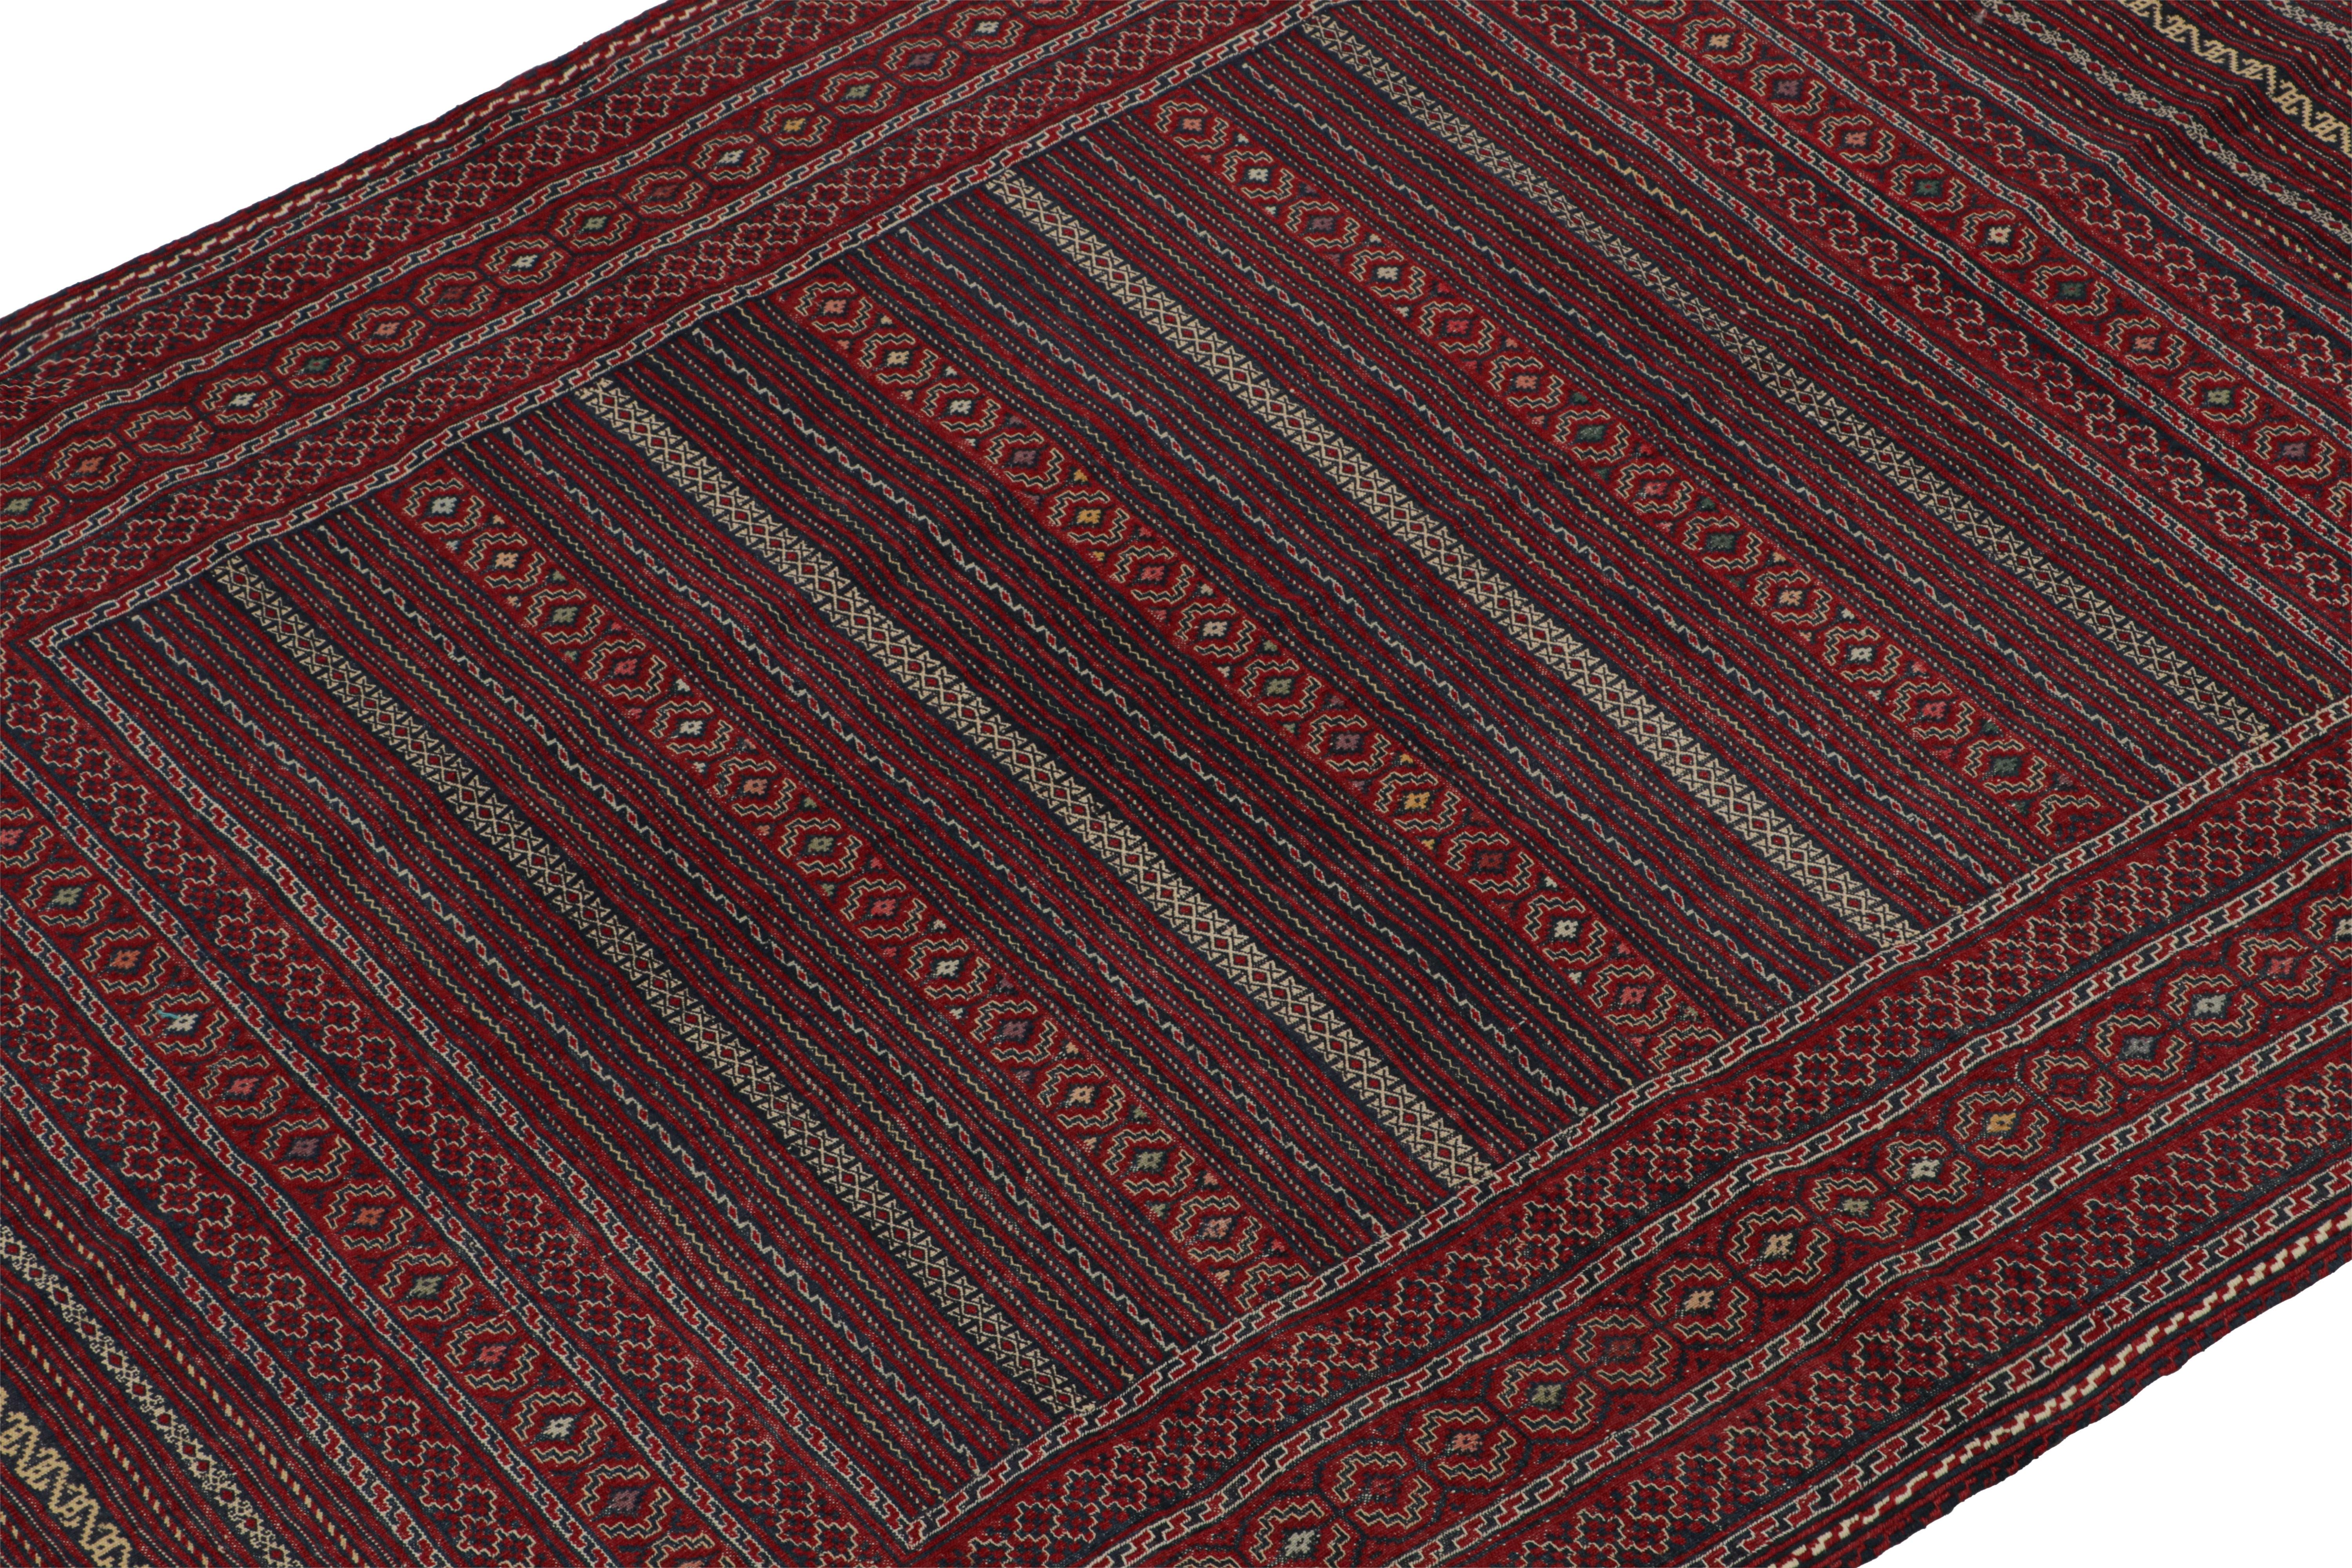 Hand-Woven Vintage Baluch Tribal Kilim with Red & Blue Geometric Patterns, from Rug & Kilim For Sale